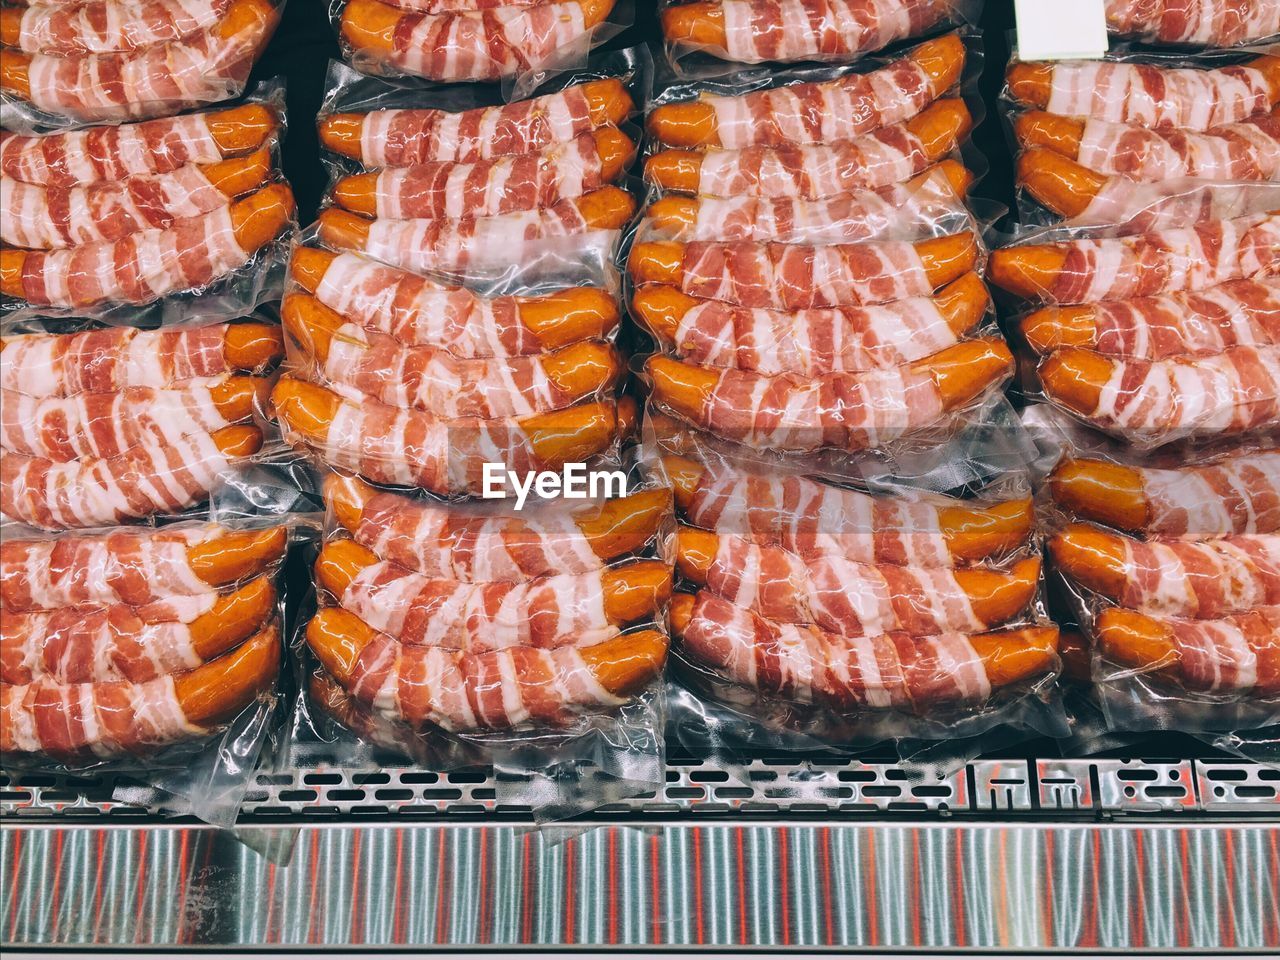 High angle view of sausages displayed at market